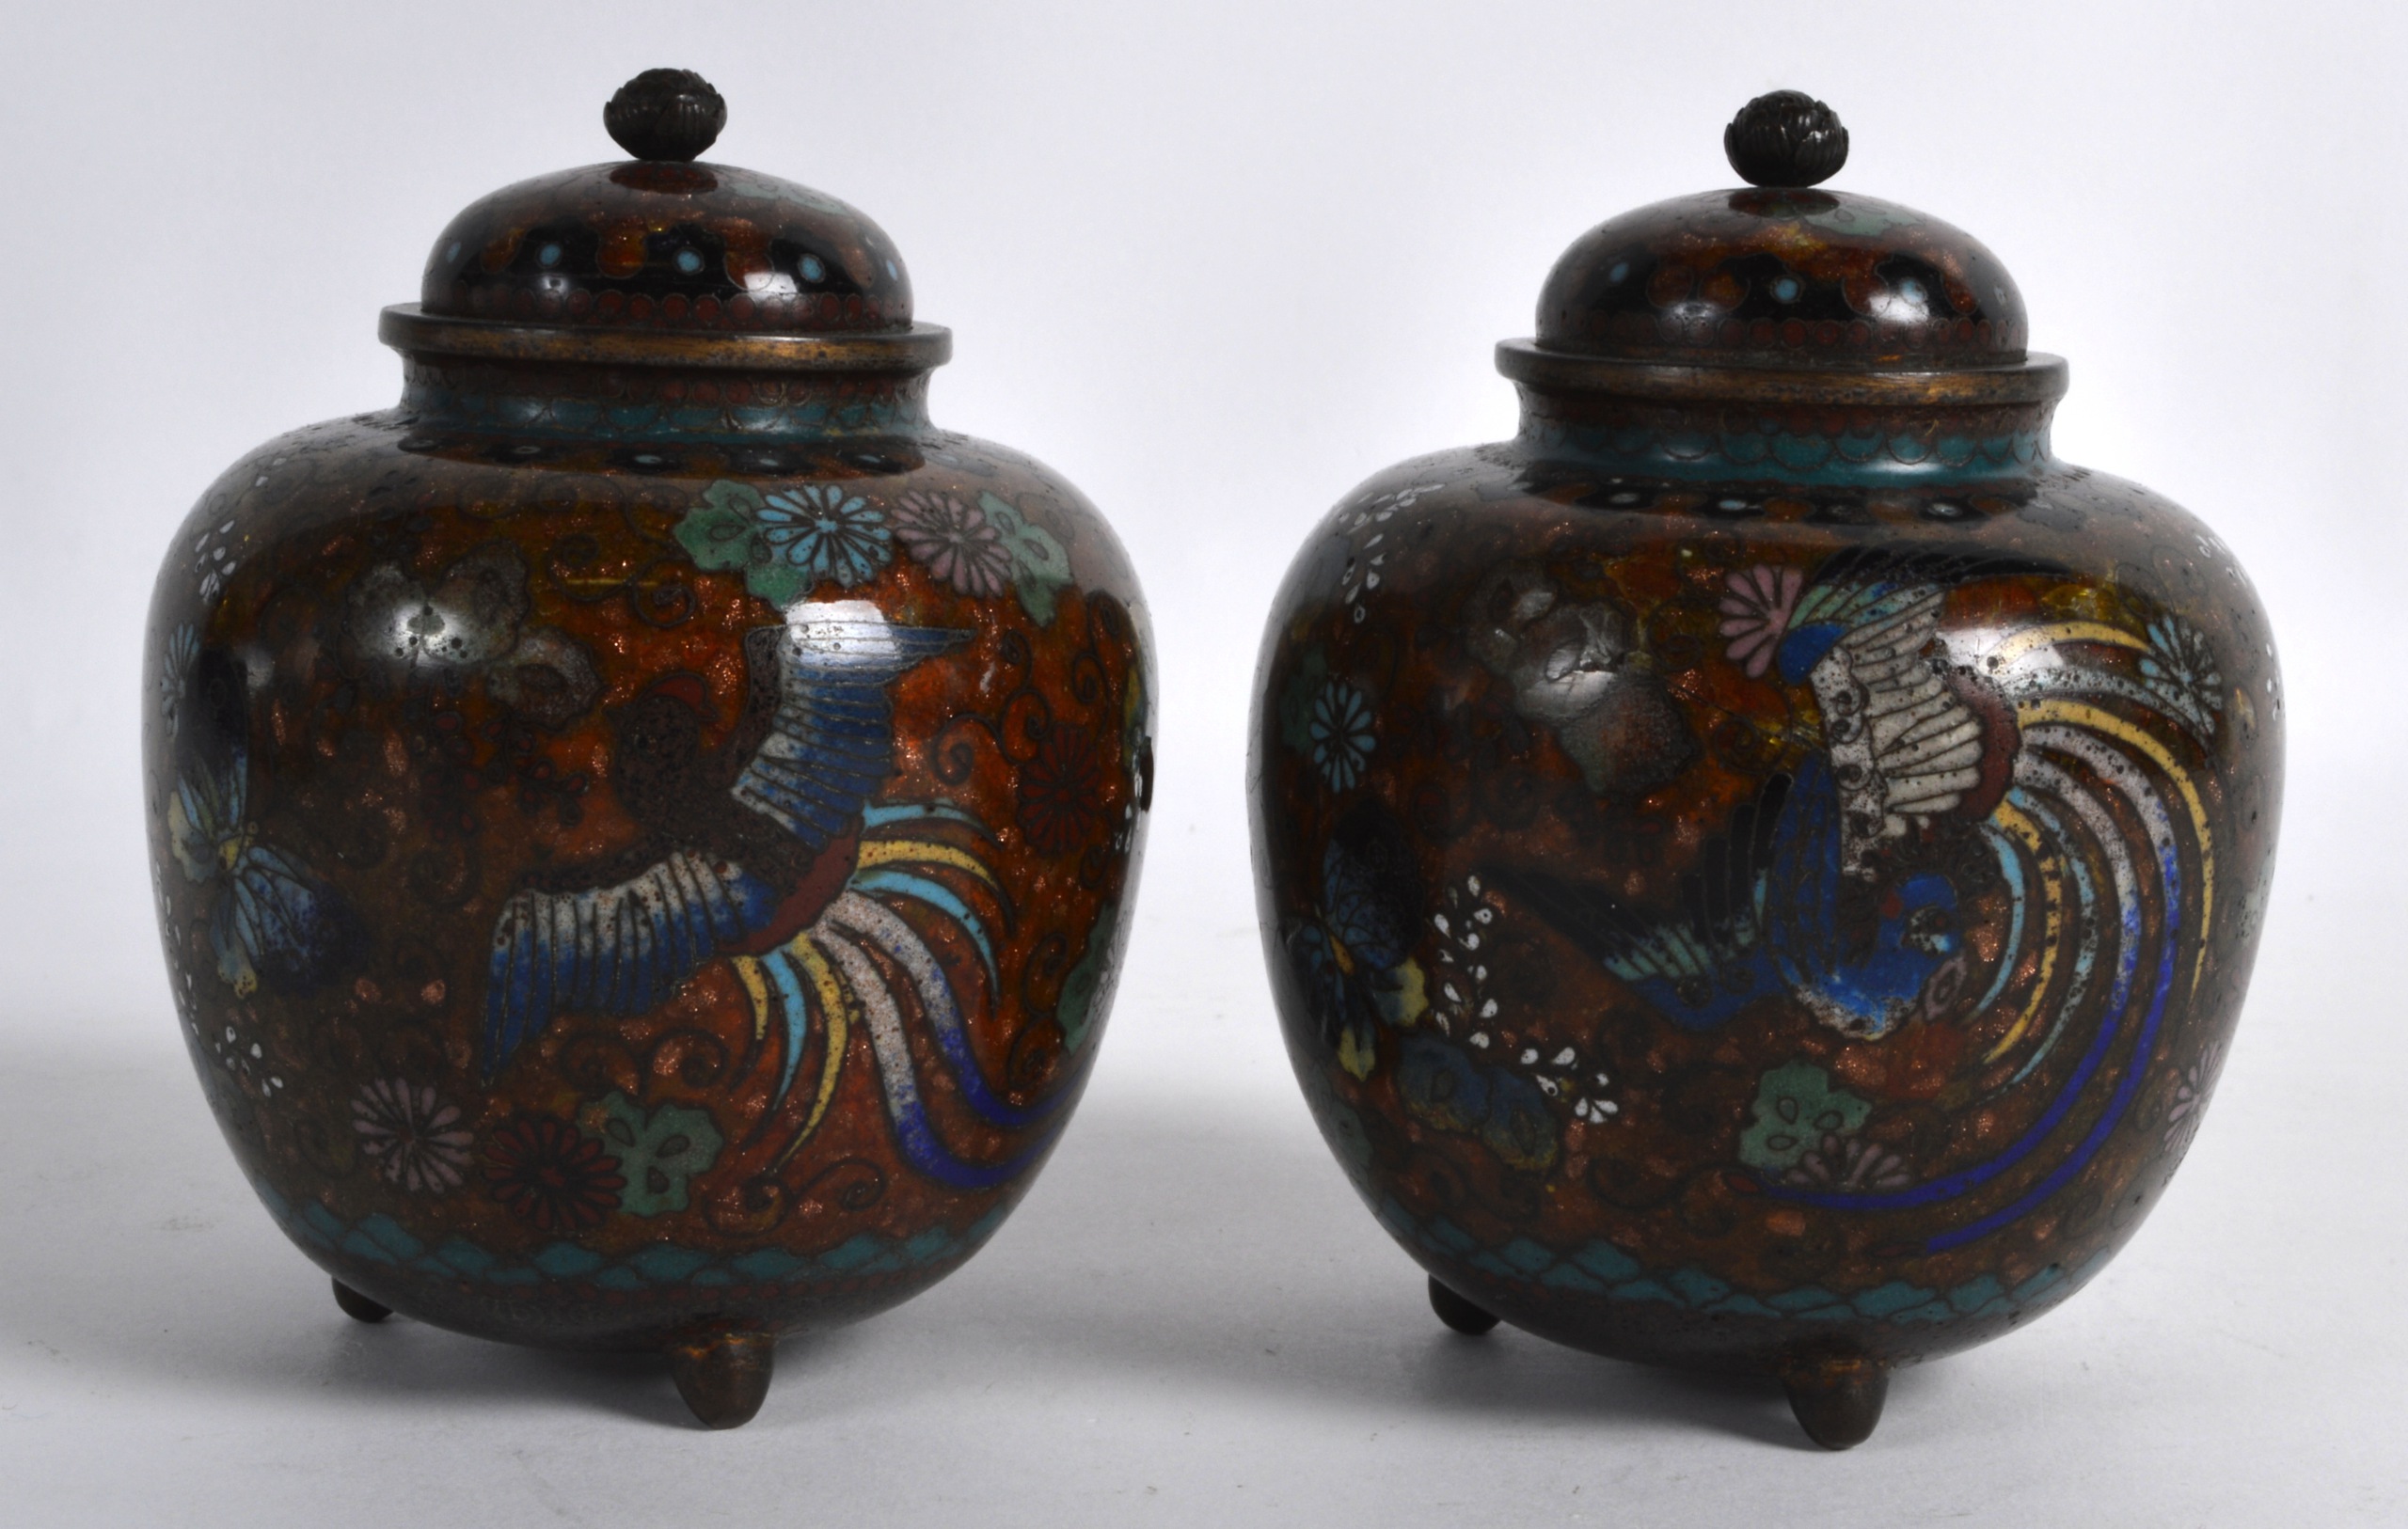 A PAIR OF EARLY 20TH CENTURY JAPANESE MEIJI PERIOD CLOISONNE ENAMEL VASES & COVERS decorated with